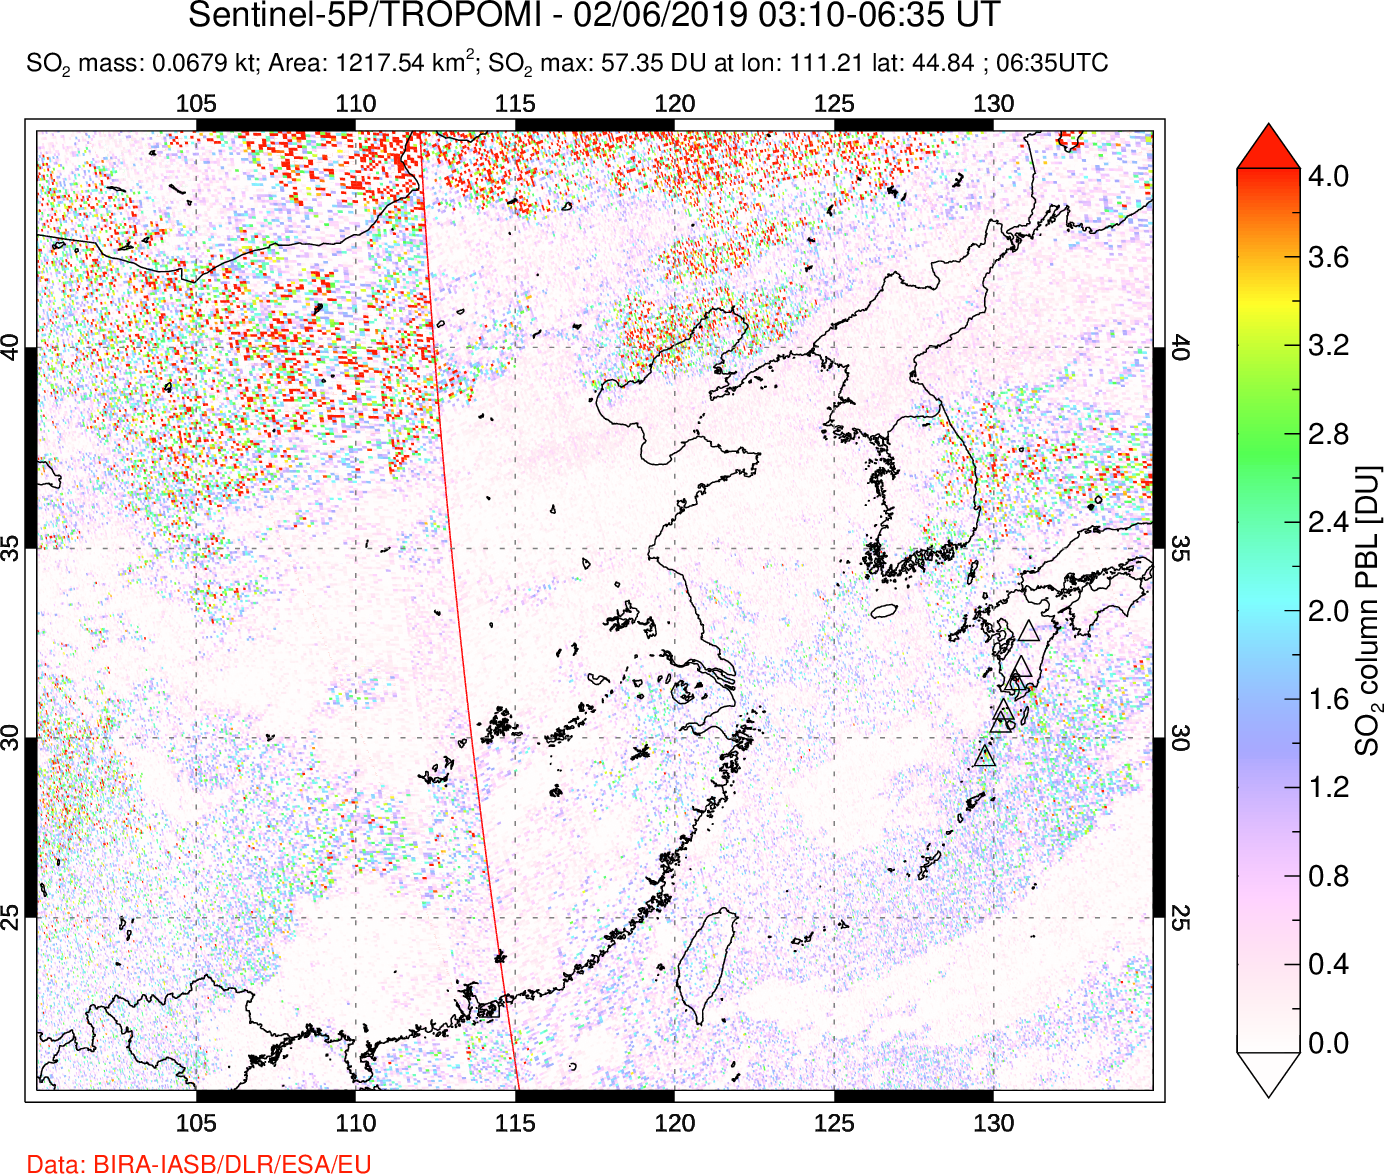 A sulfur dioxide image over Eastern China on Feb 06, 2019.